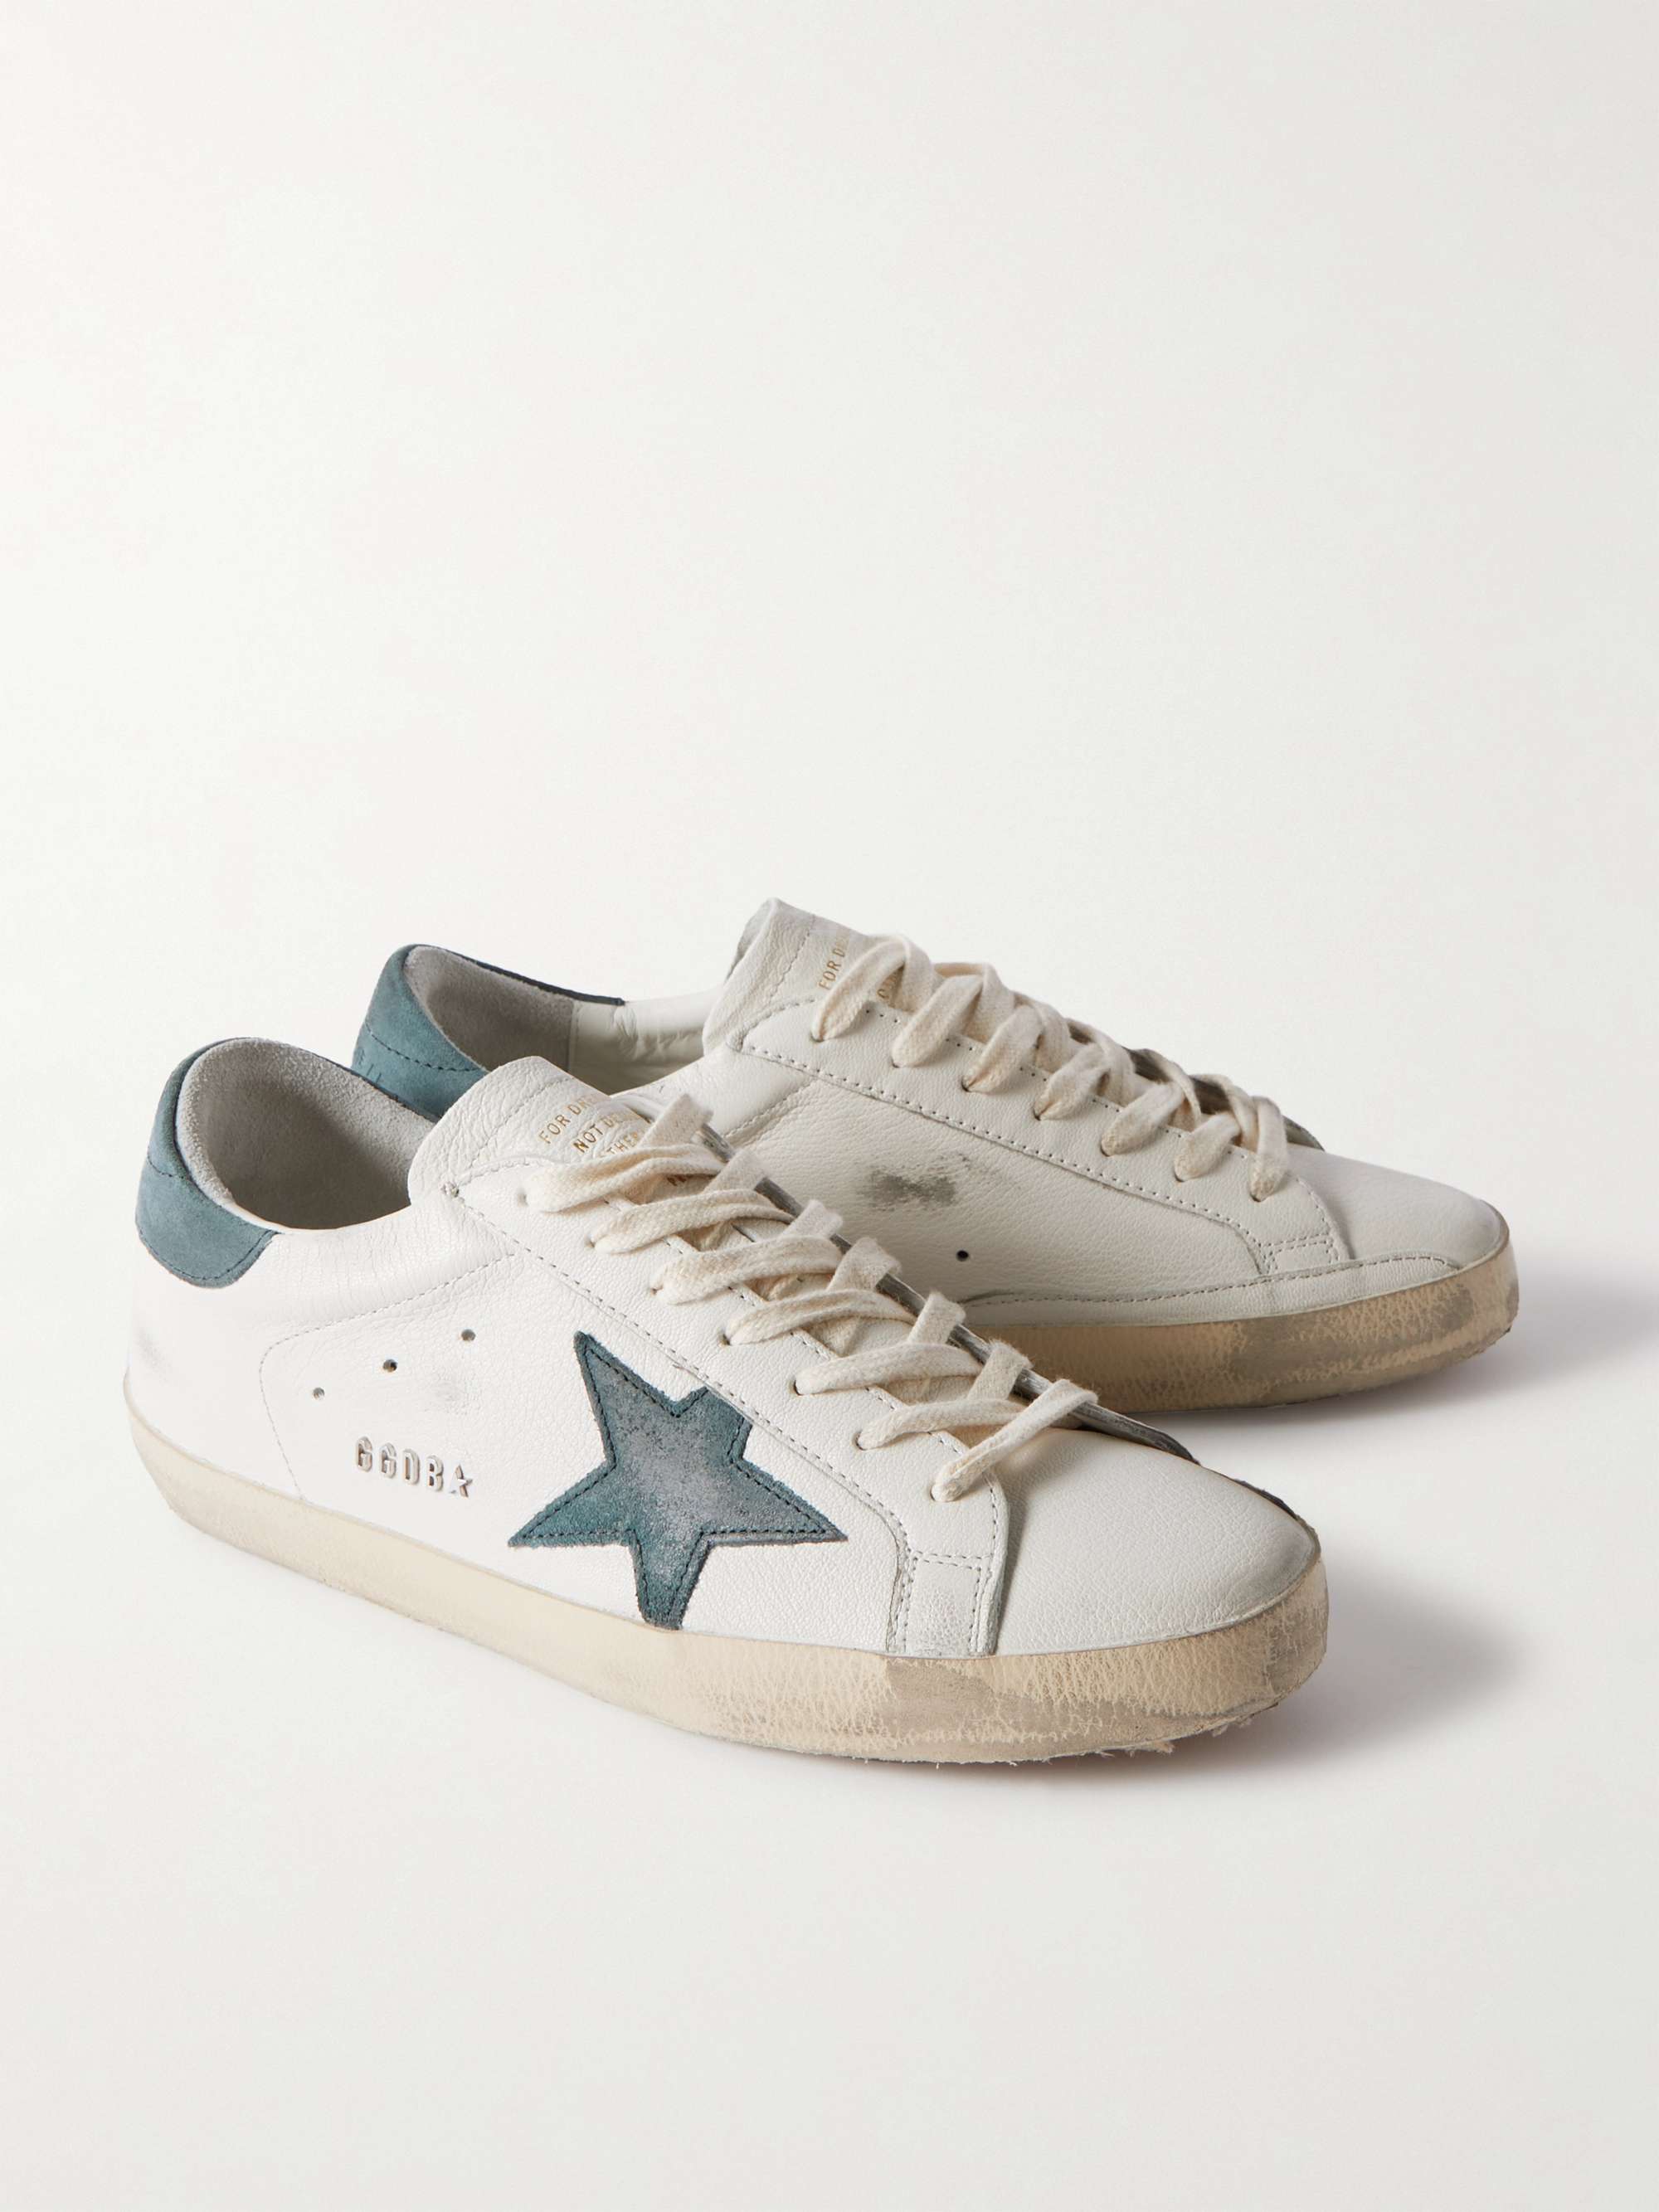 GOLDEN GOOSE Superstar Distressed Suede-Trimmed Full-Grain Leather Sneakers